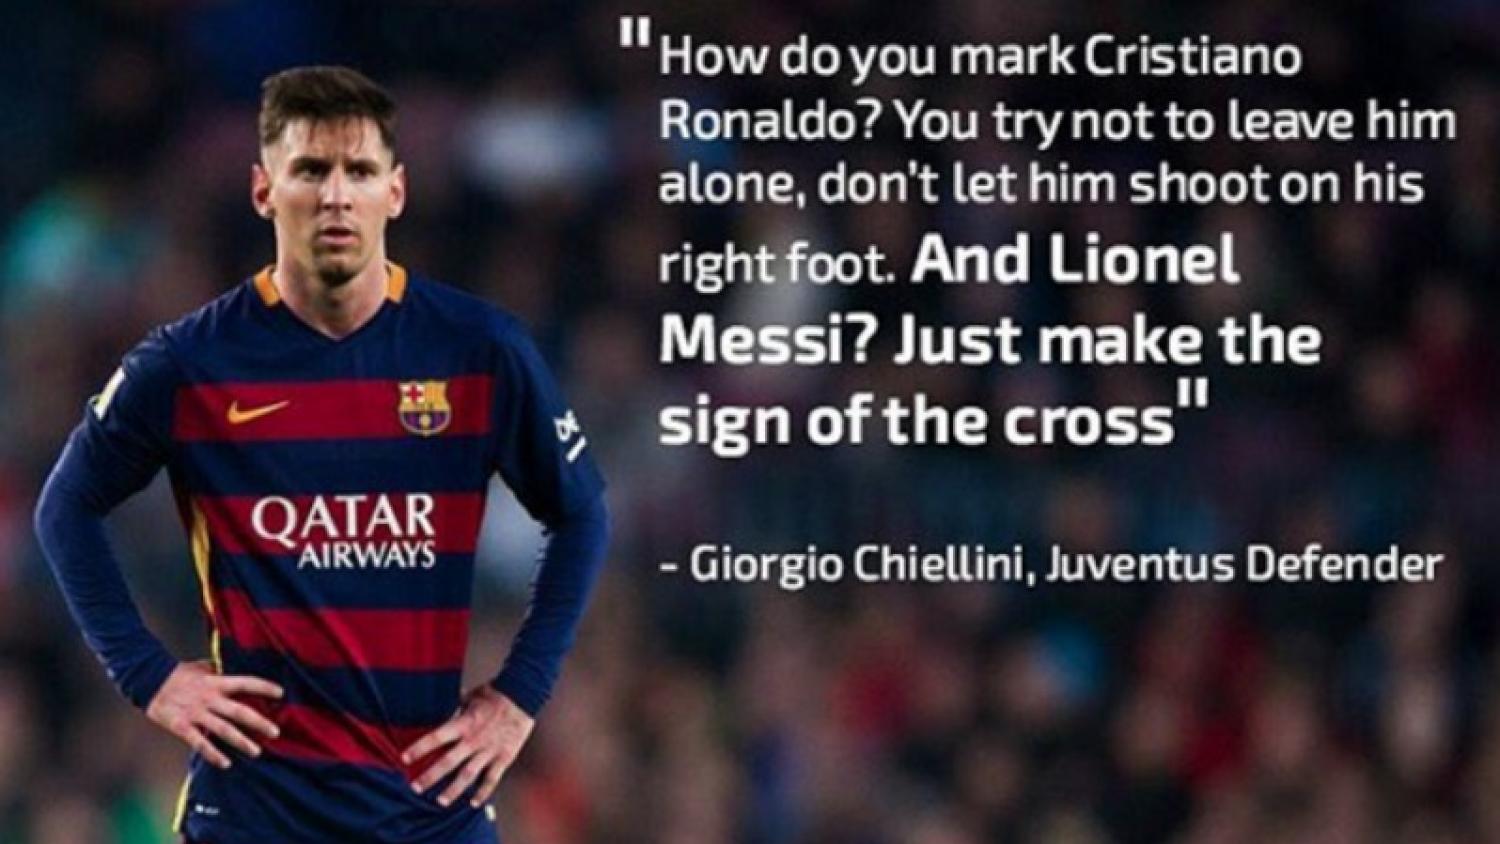 great soccer quotes